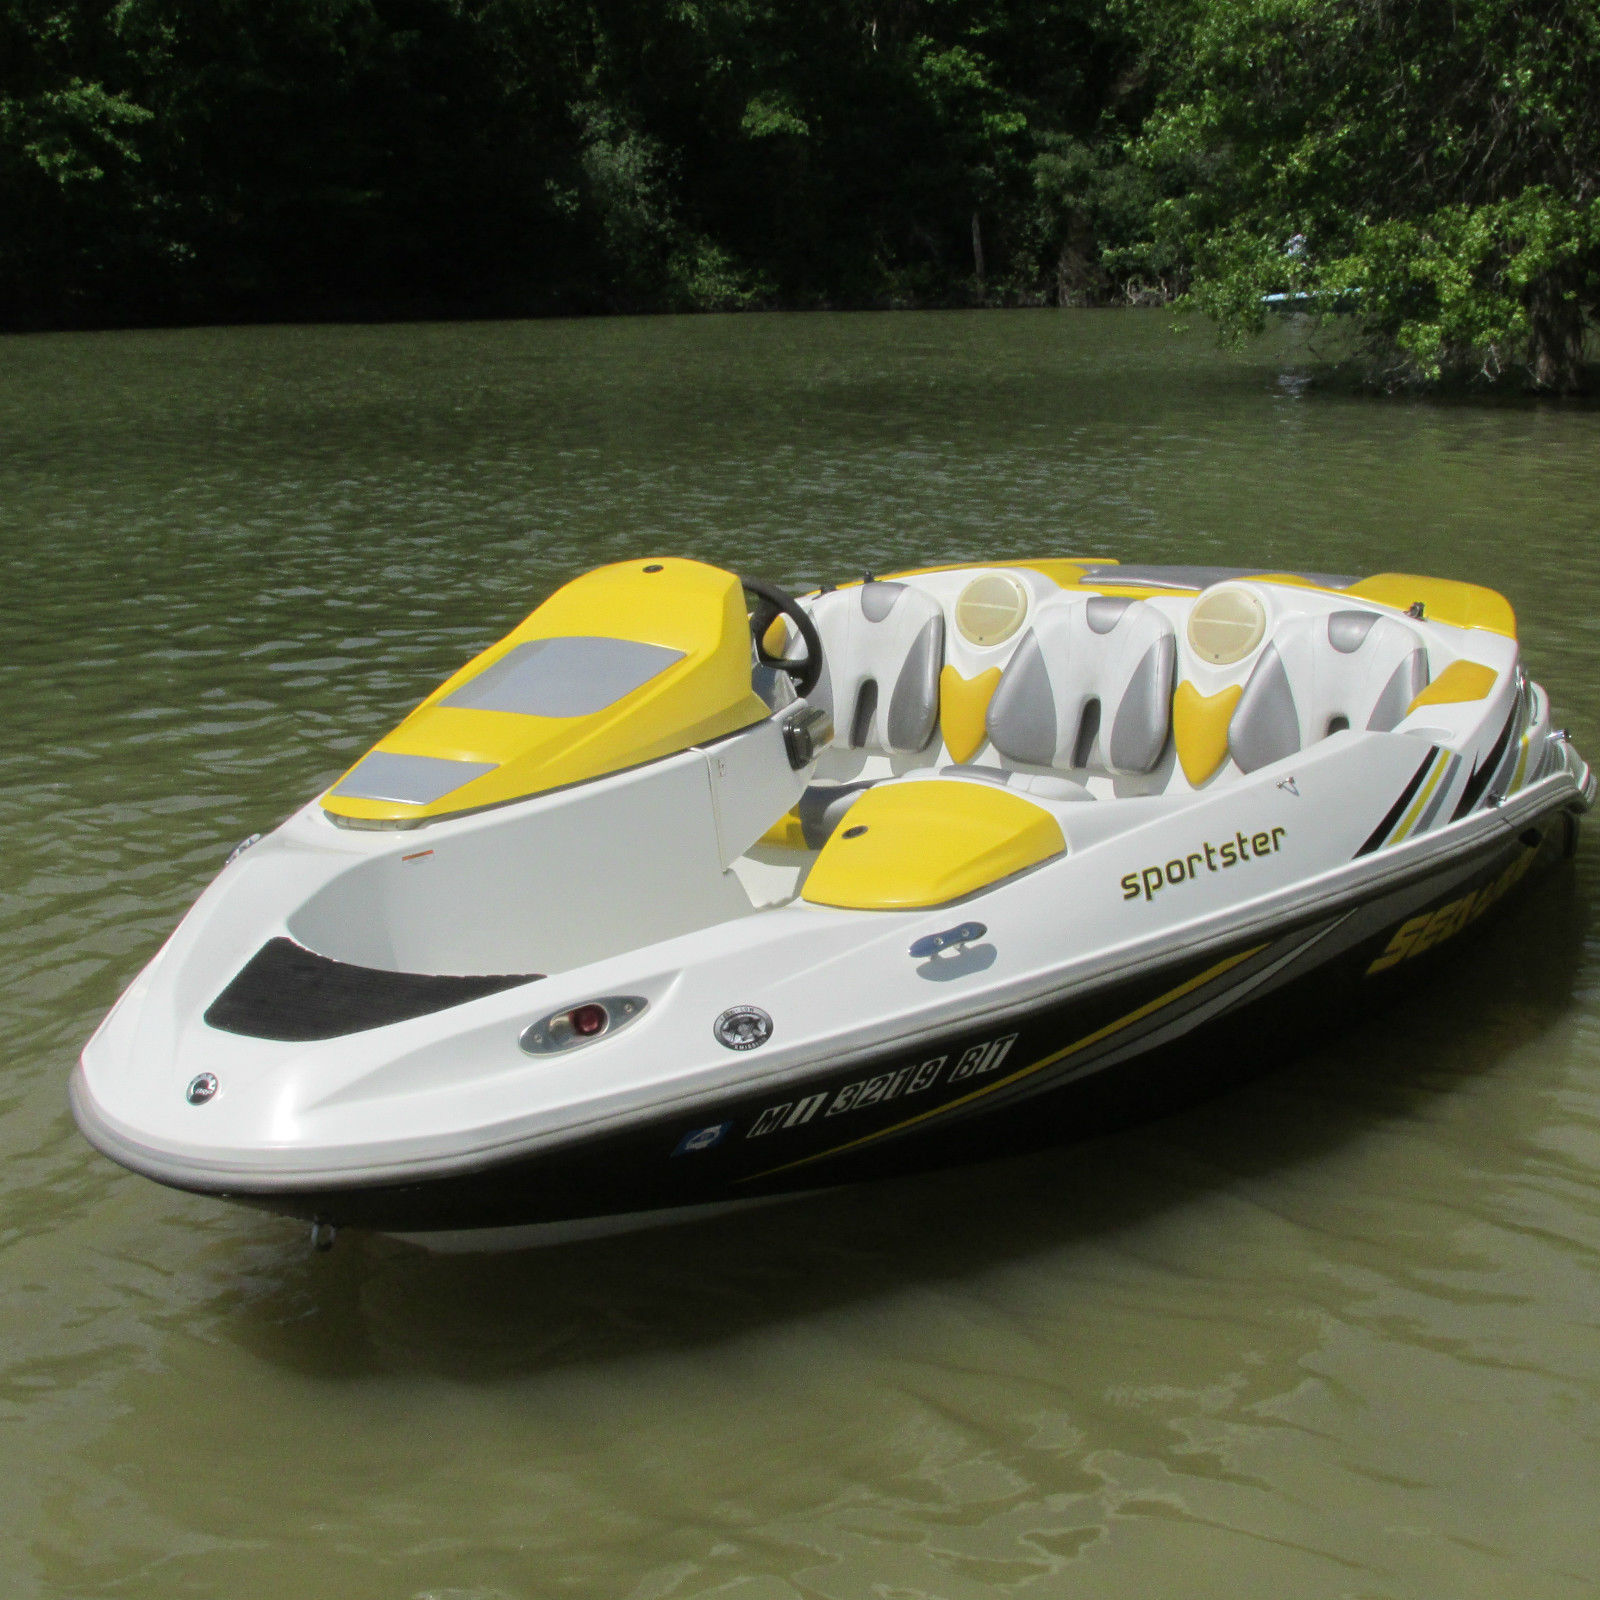 Seadoo 2005 for sale for $8,500 - Boats-from-USA.com